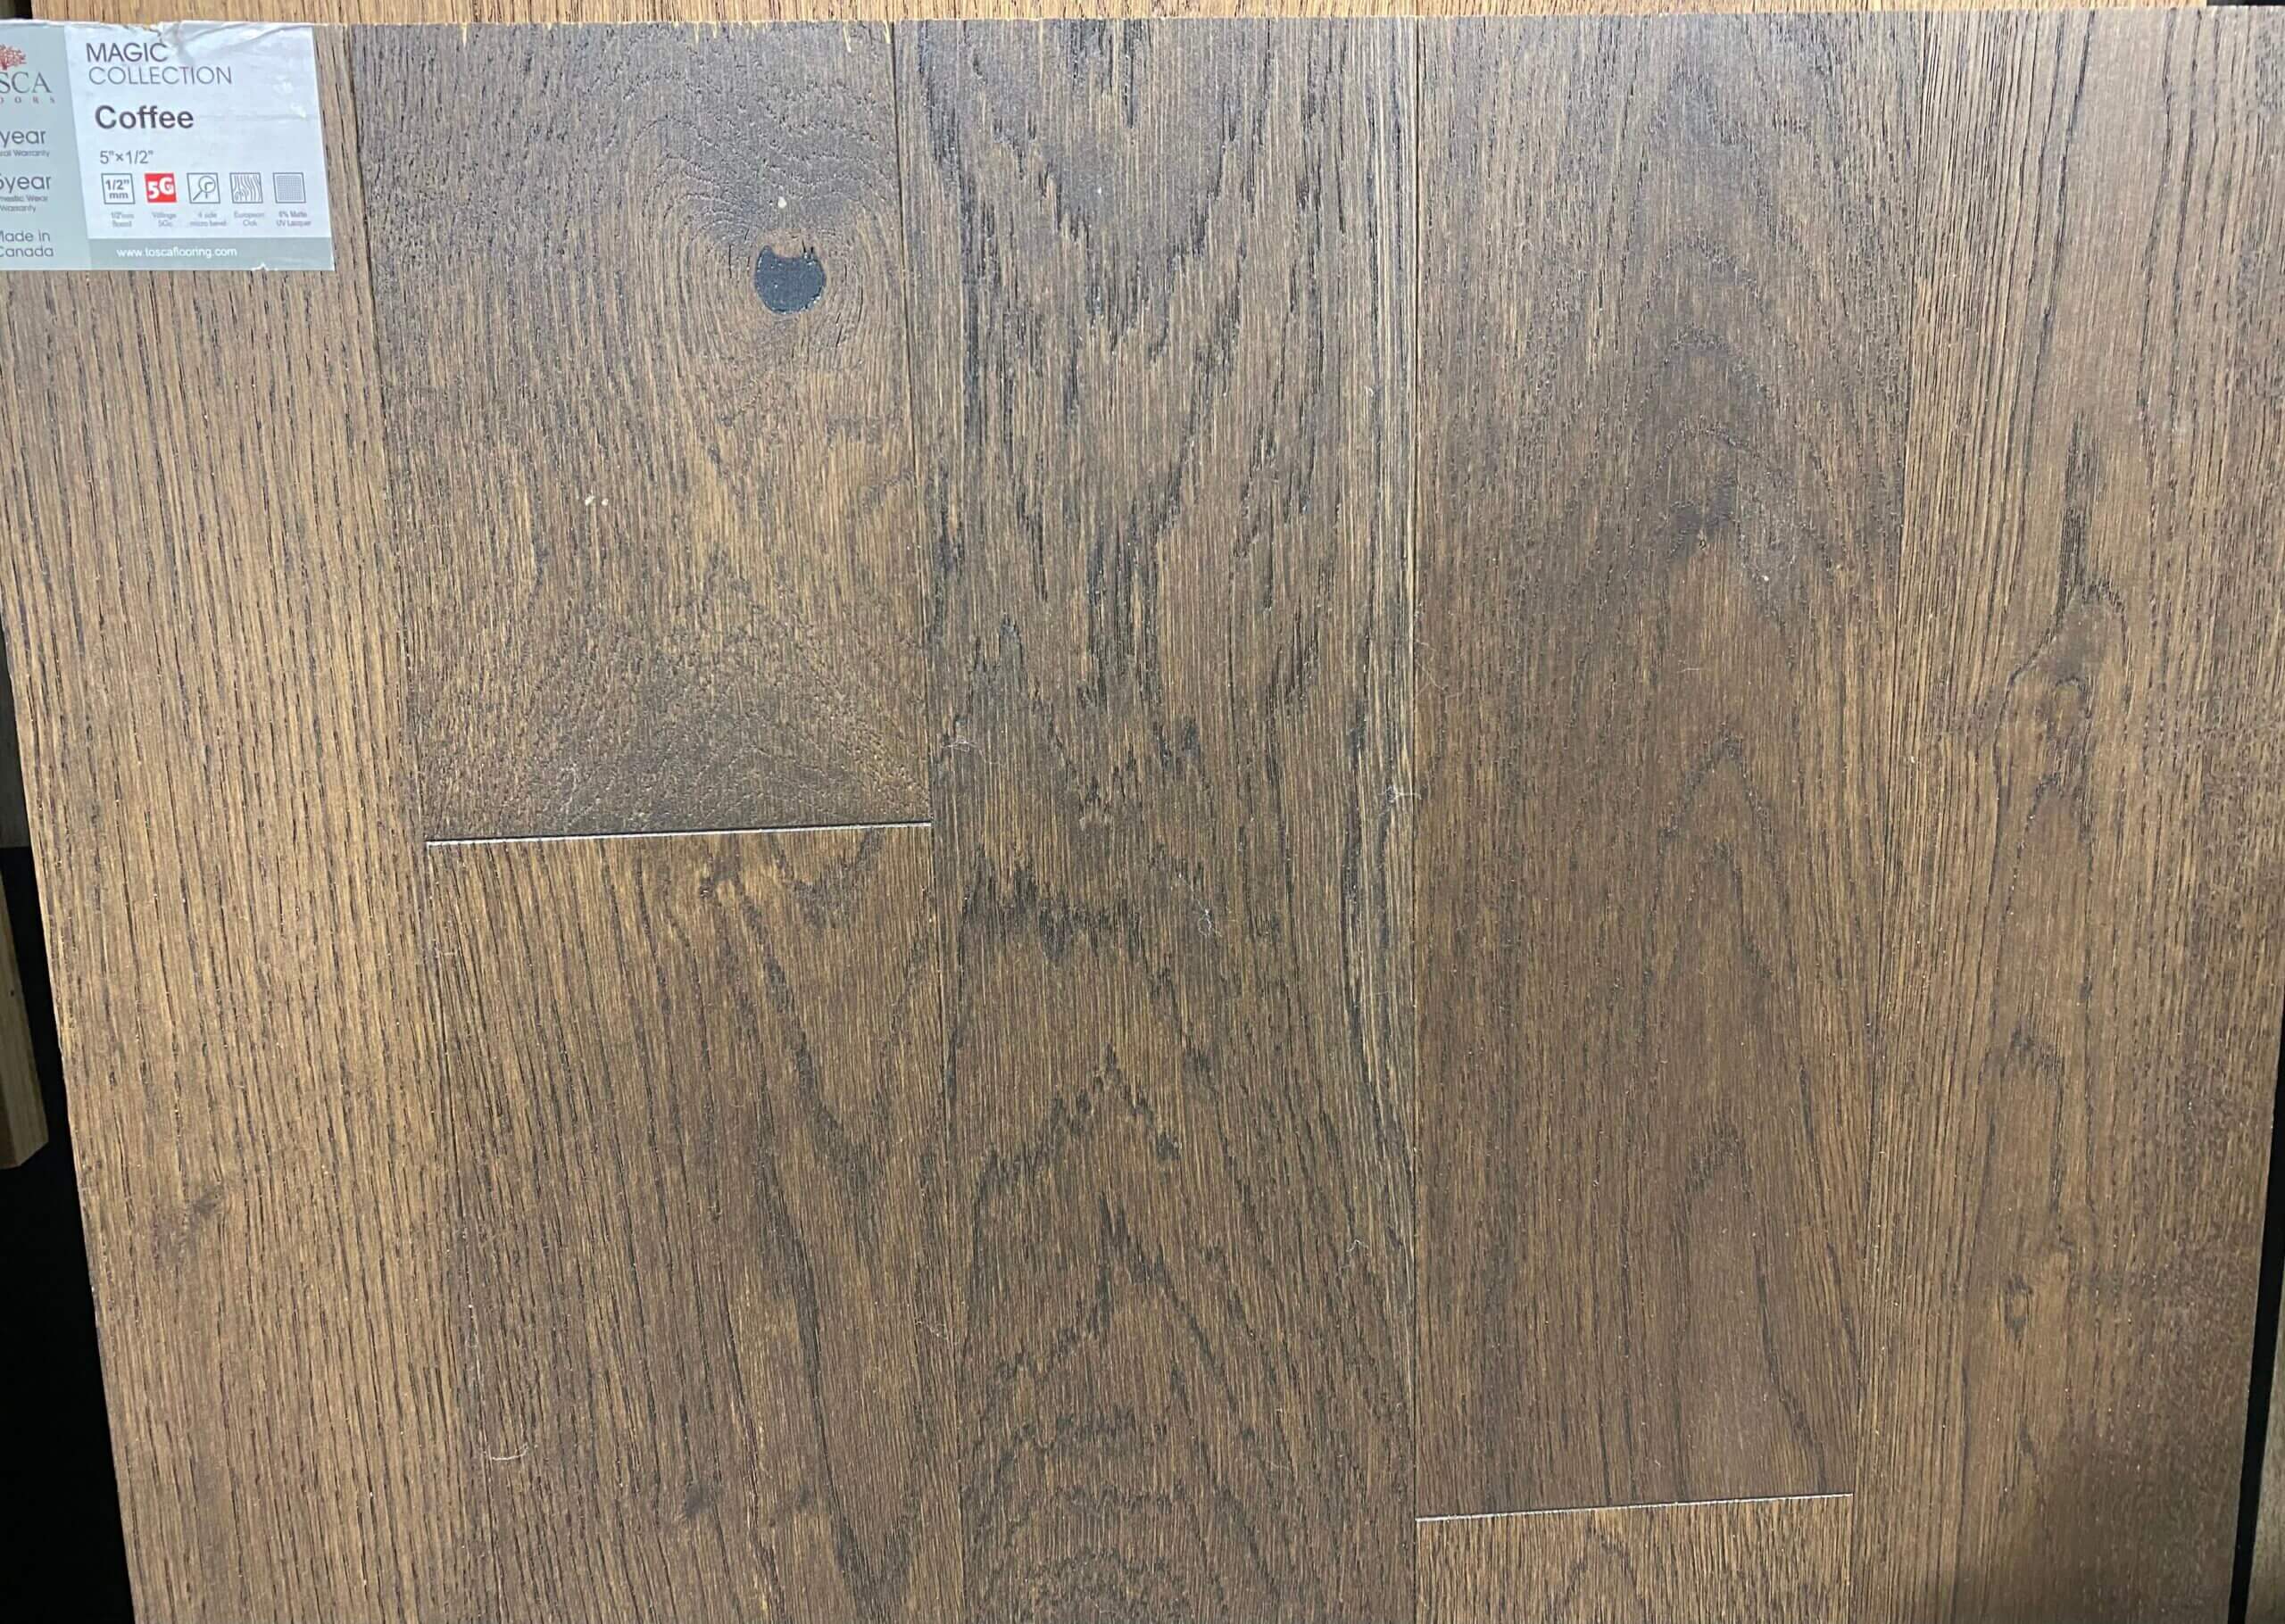 Tosca Engineered Flooring Magic Collection Coffee 5″x1/2″ mm (click)